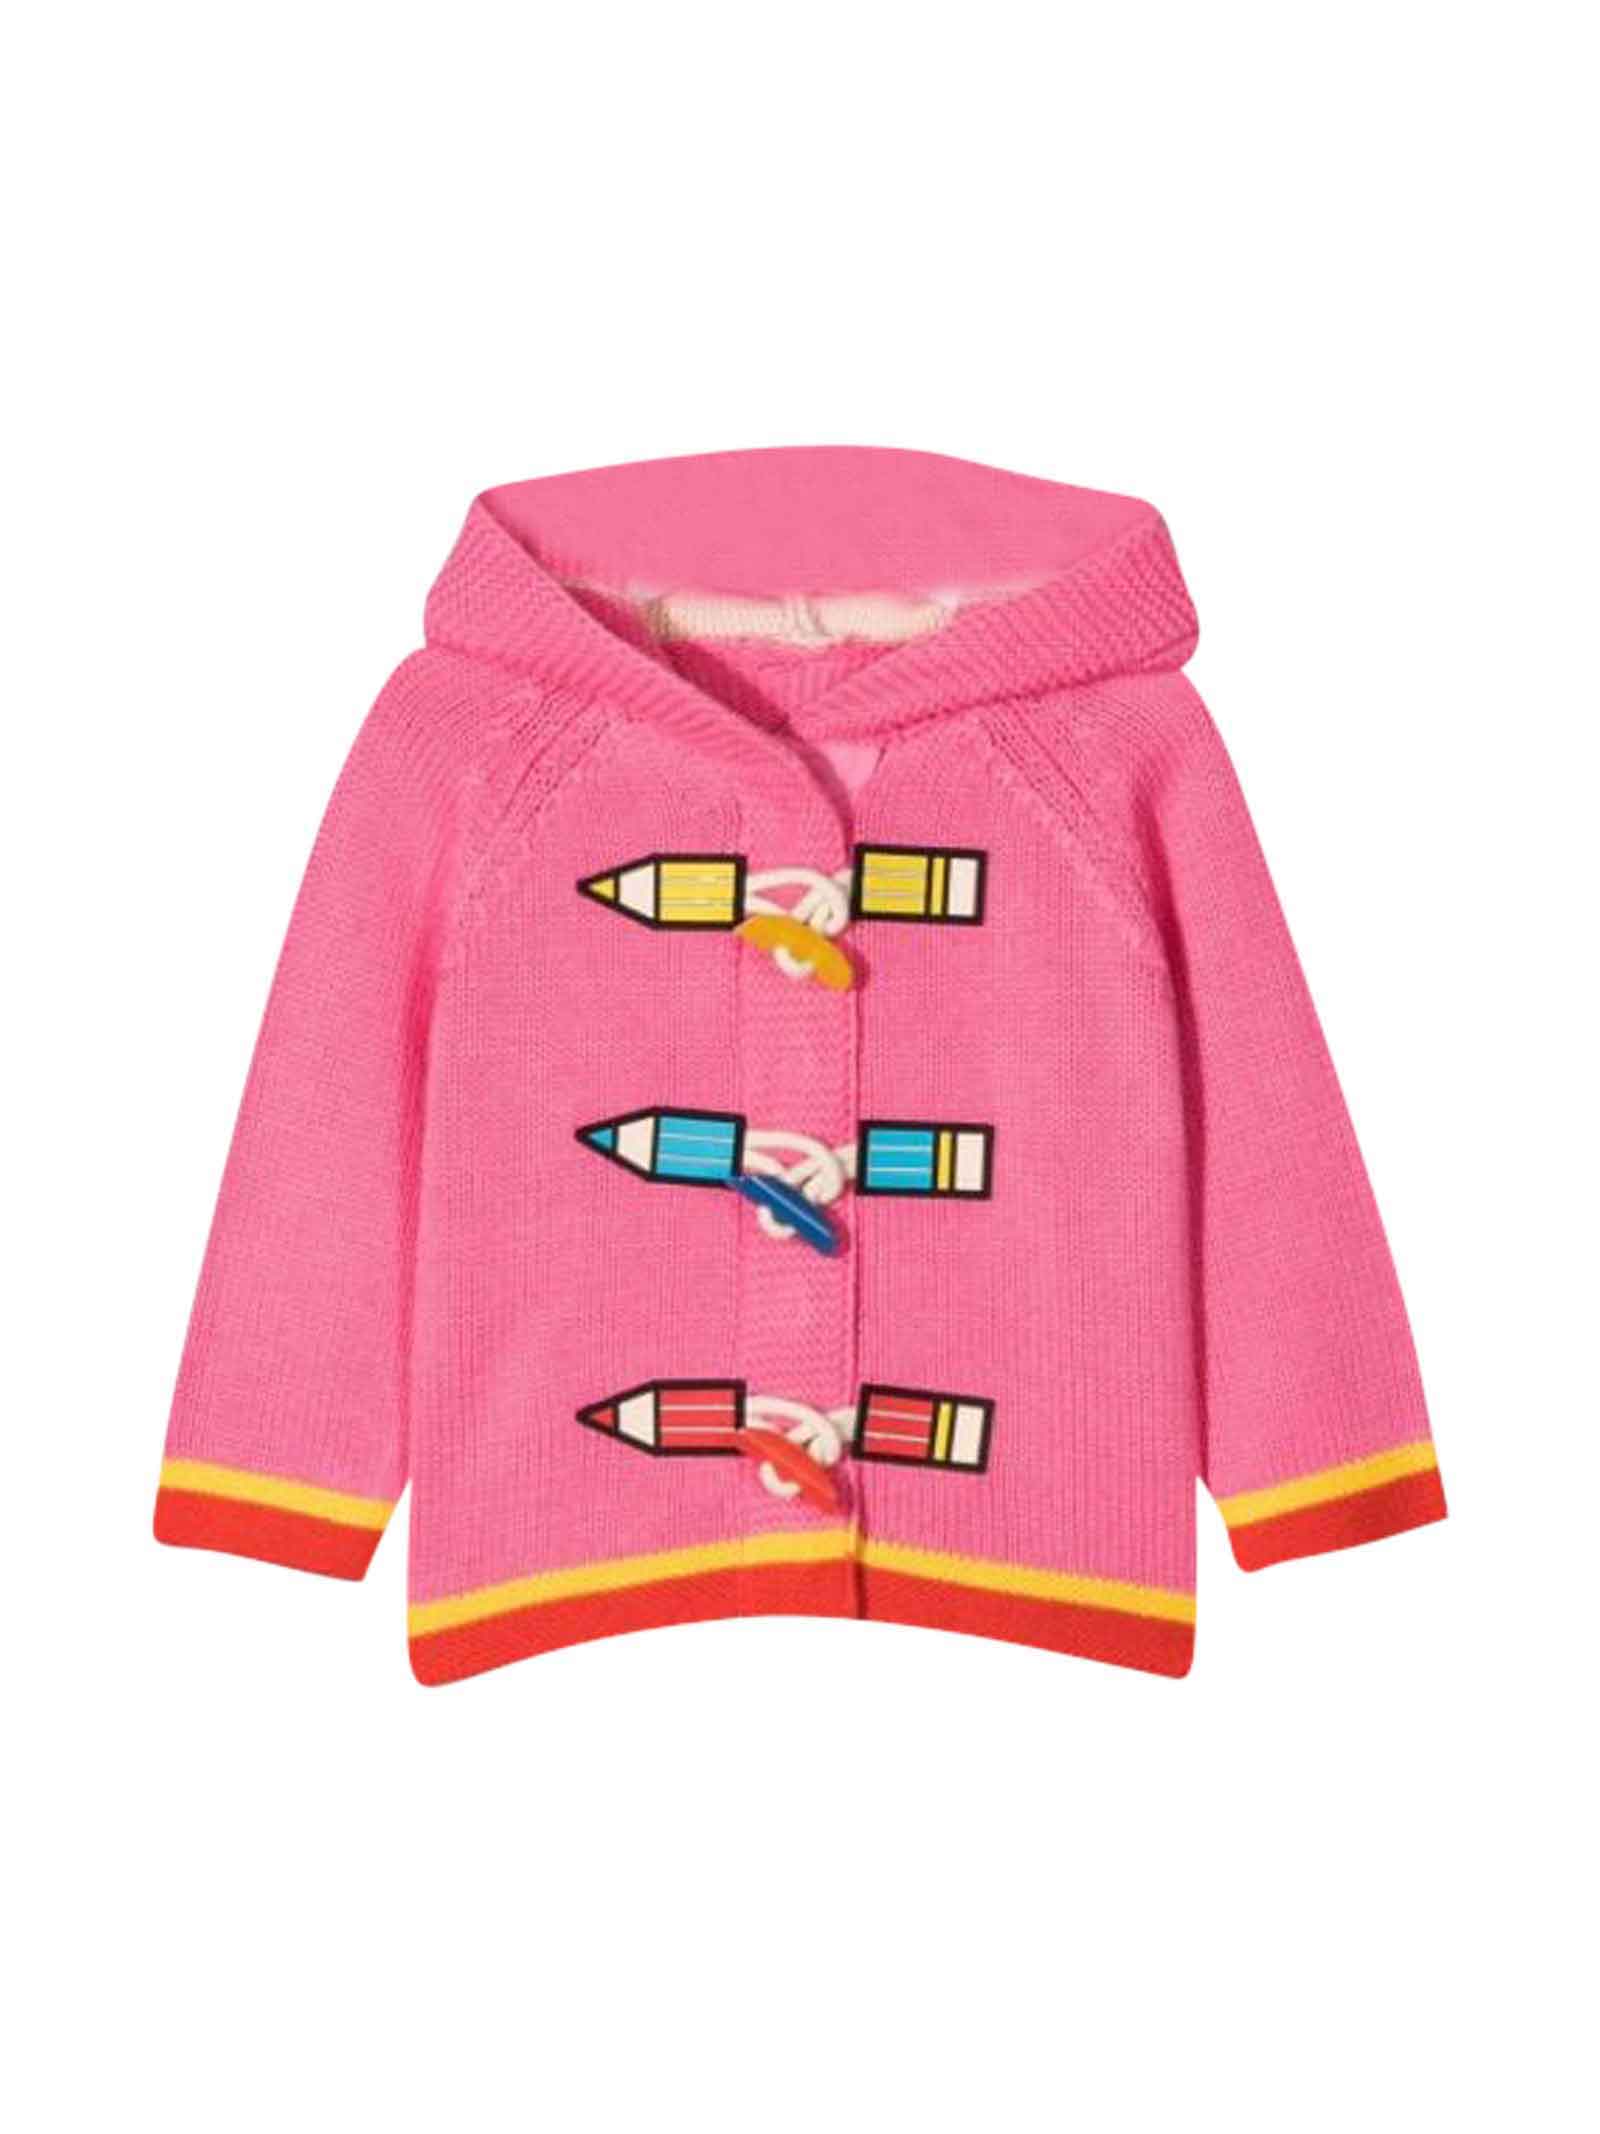 Stella McCartney Kids Pink Cardigan With Colored Press, Long Sleeve And Hood